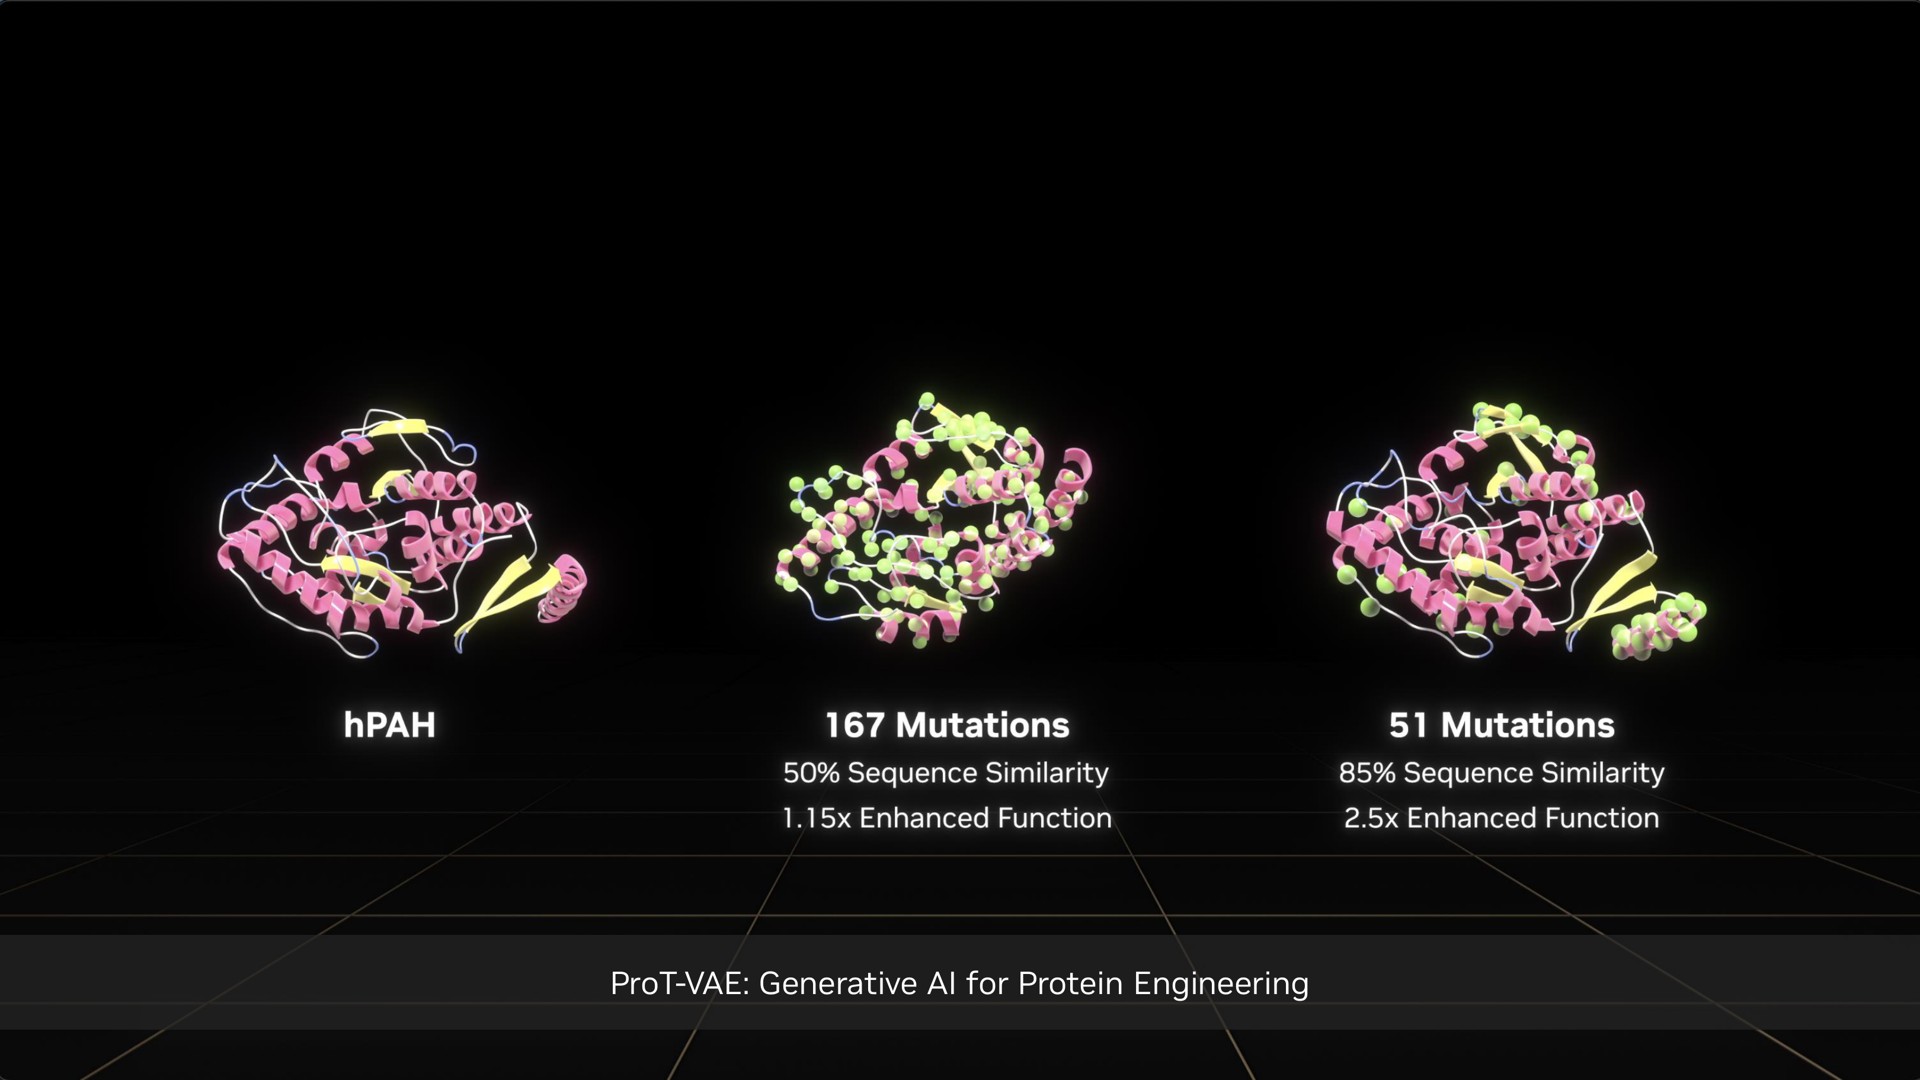 generative for protein engineering mutations mutations sequence similarity sequence similarity | NVIDIA